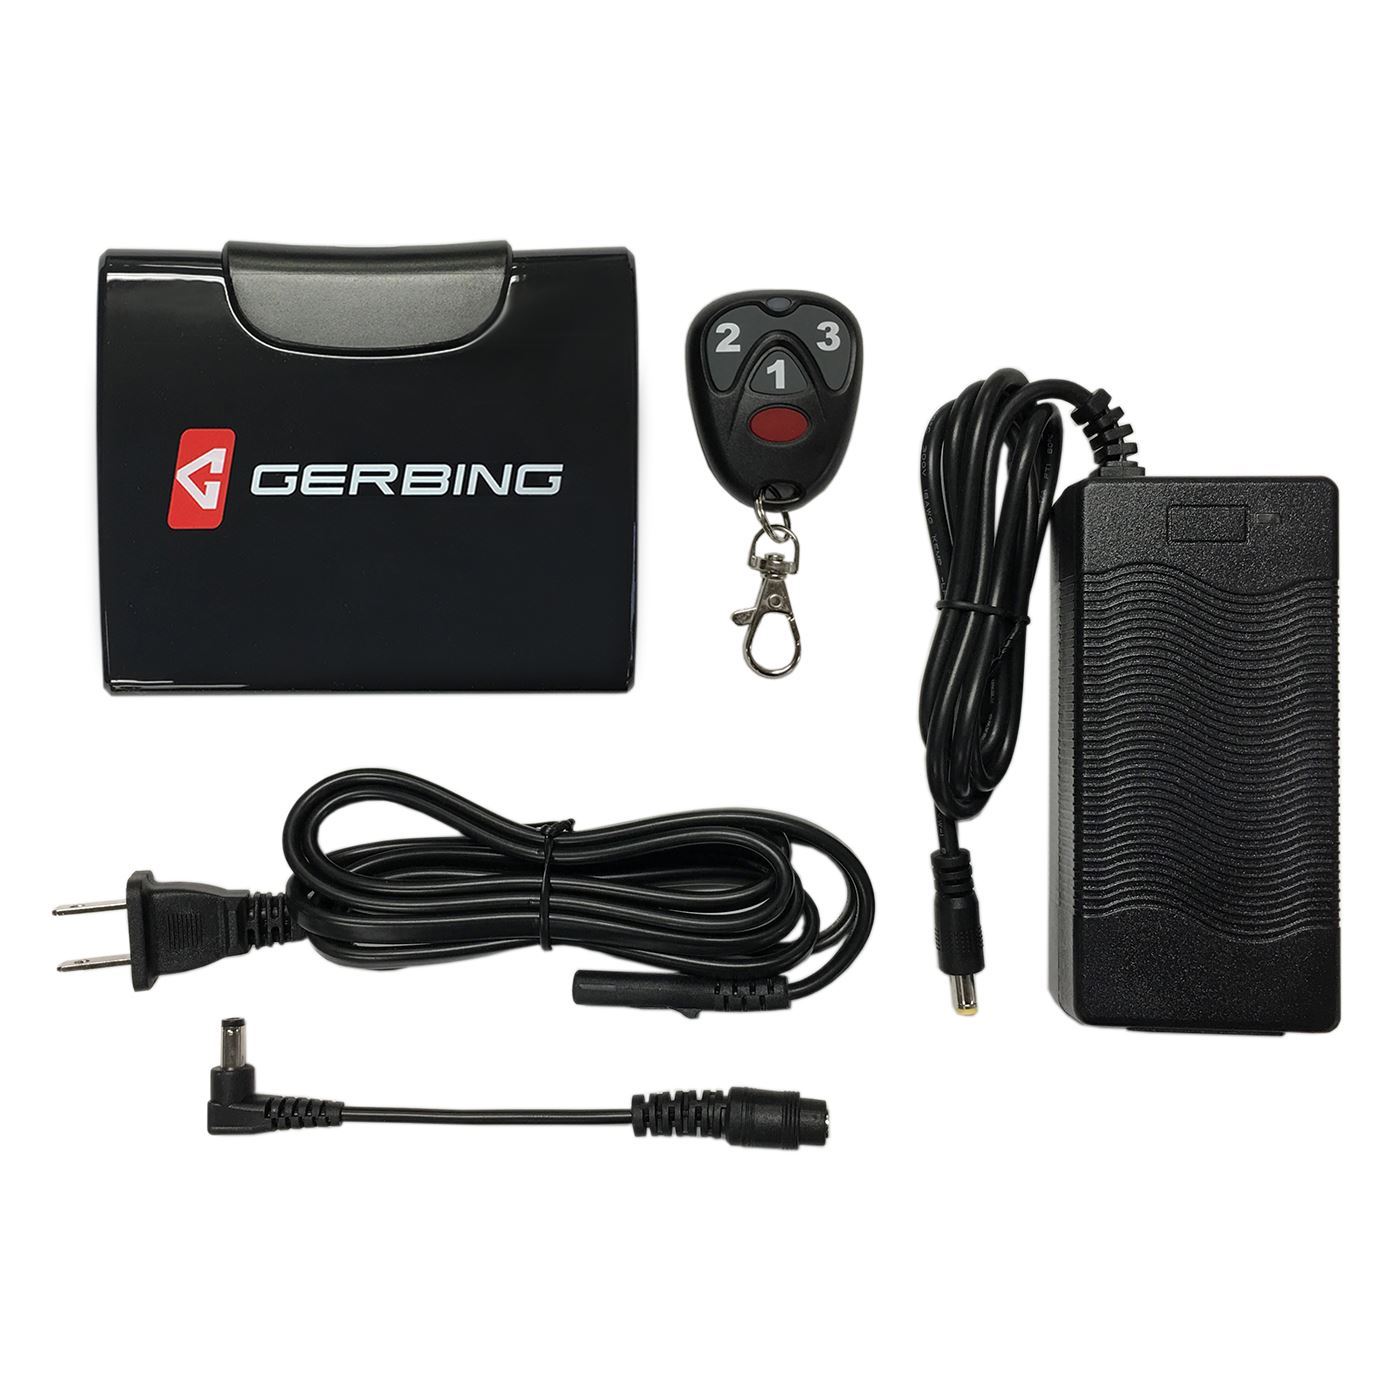 Gerbing Gyde 7V 7000mAh Extended-Life Battery with Remote & Charger Kit 